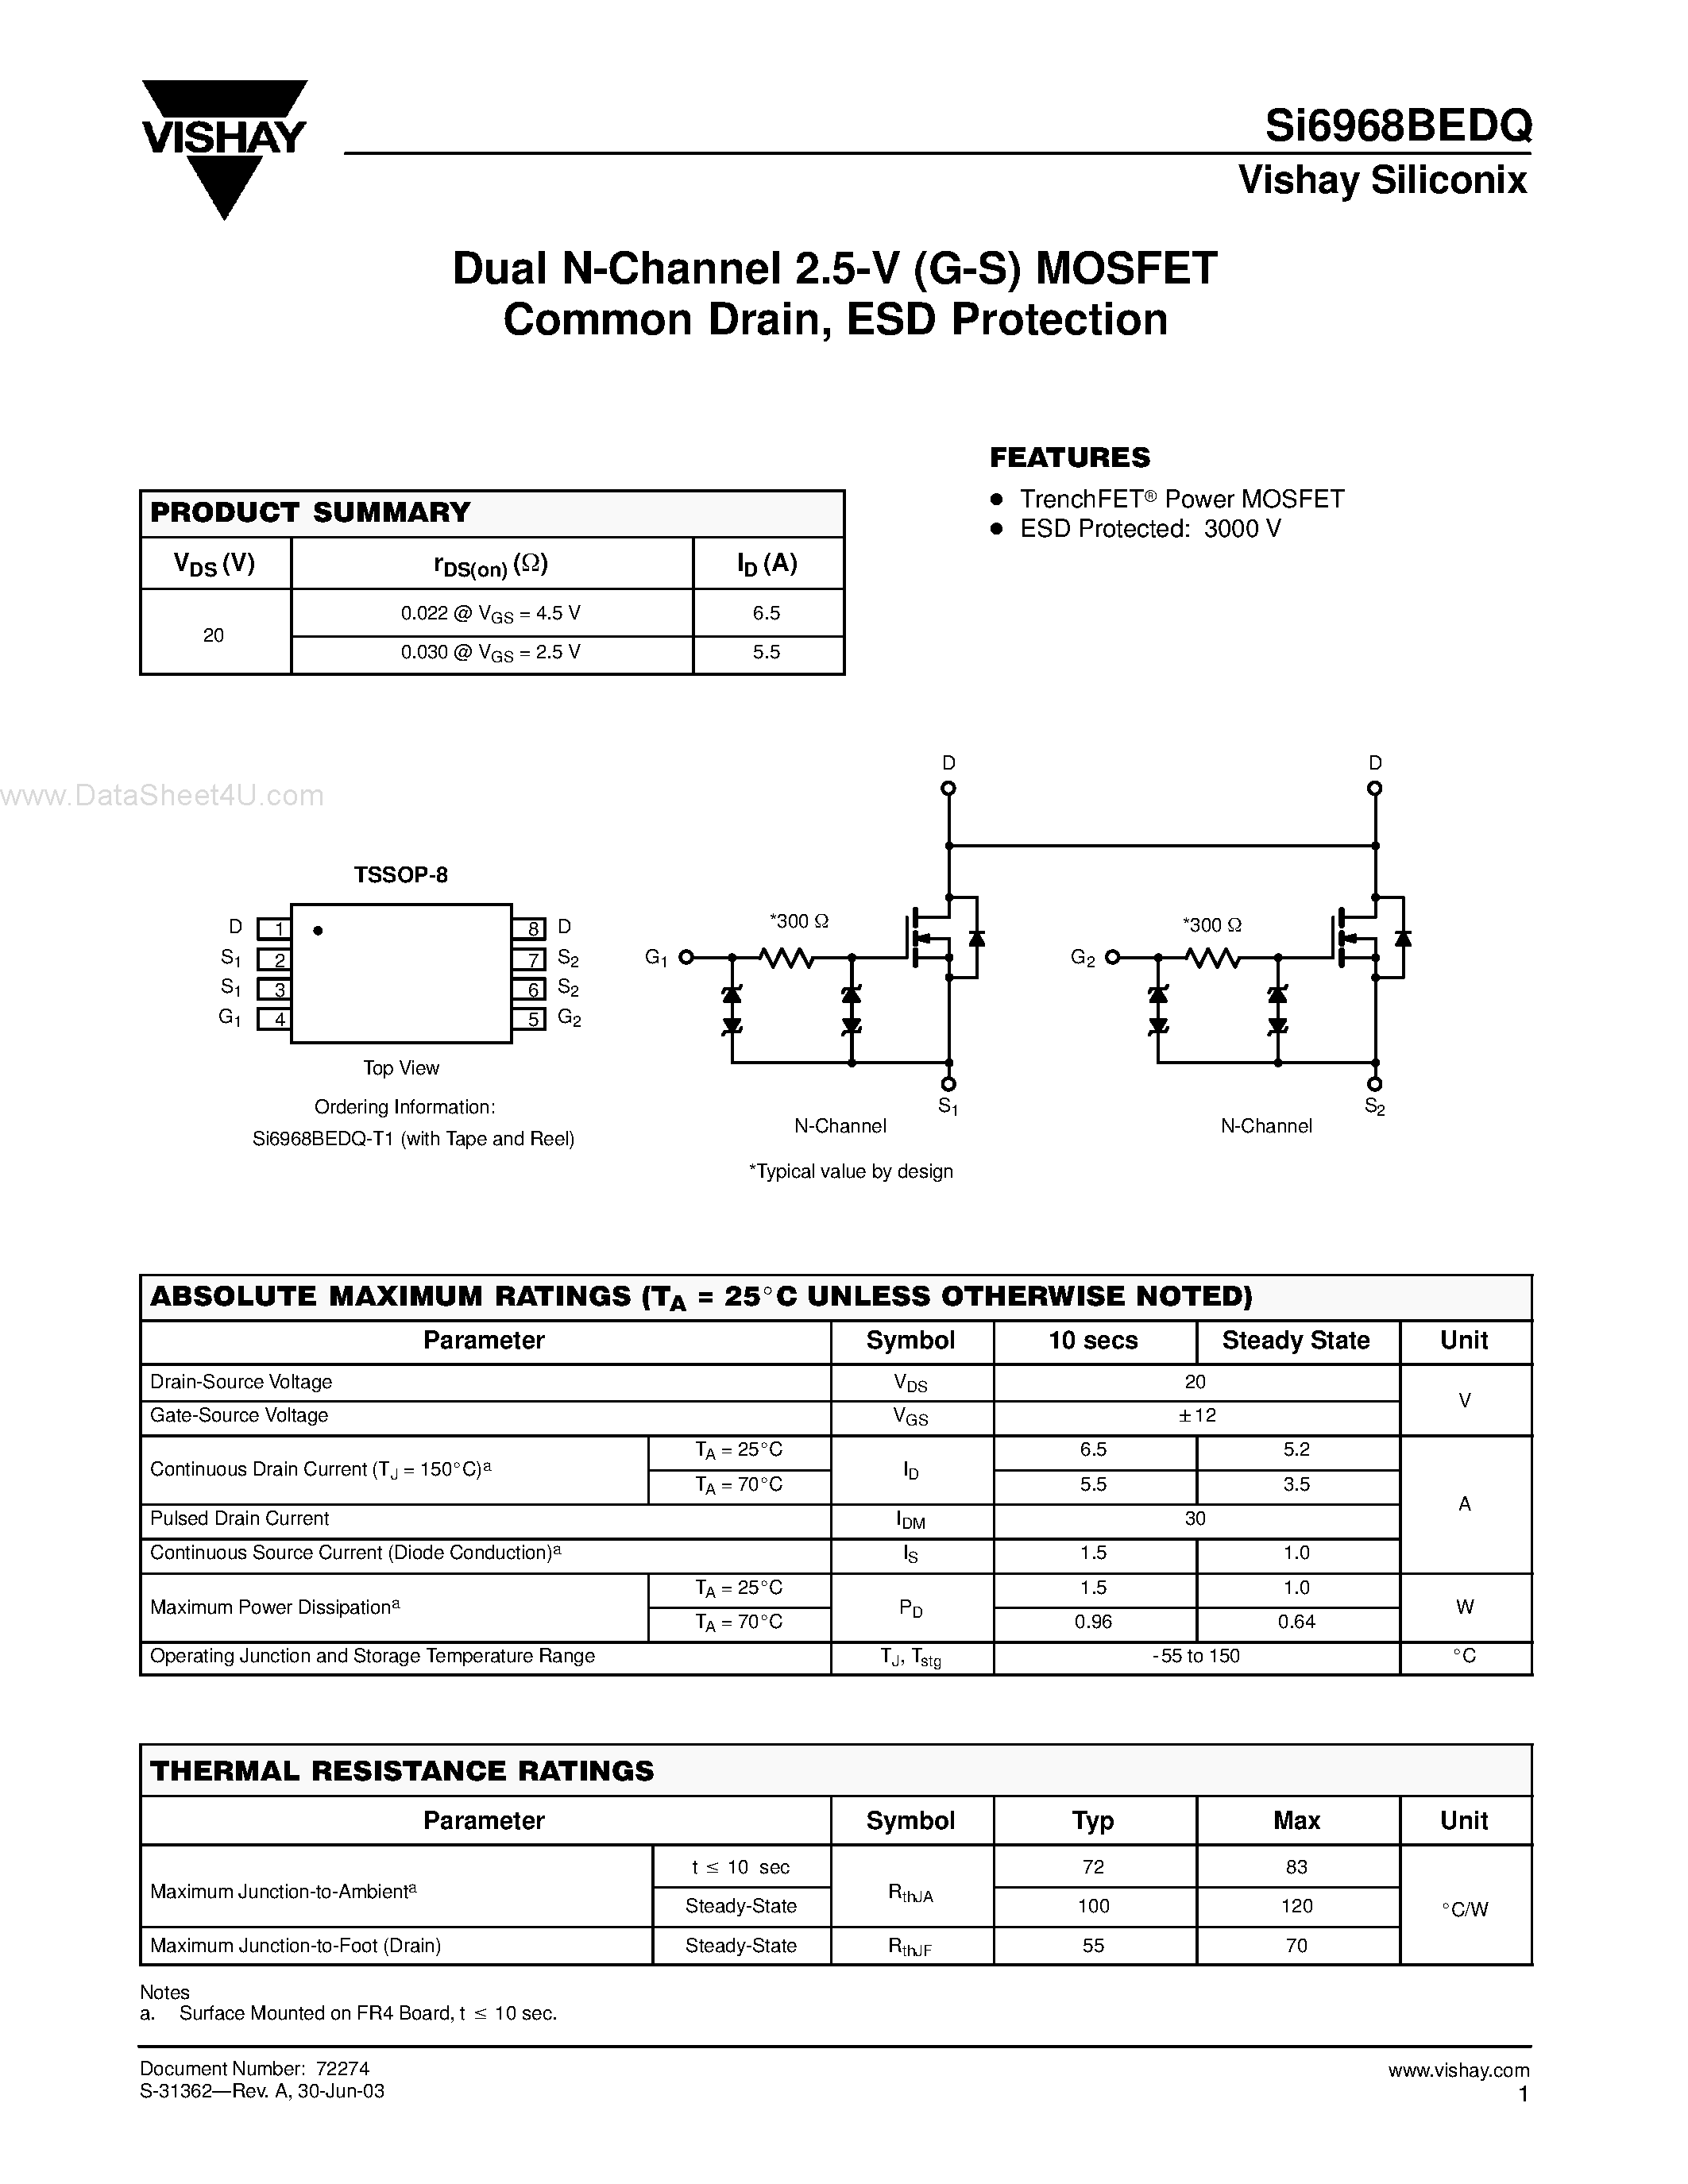 Даташит SI6968BEDQ - Dual N-Channel 2.5-V (G-S) MOSFET Common Drain страница 1